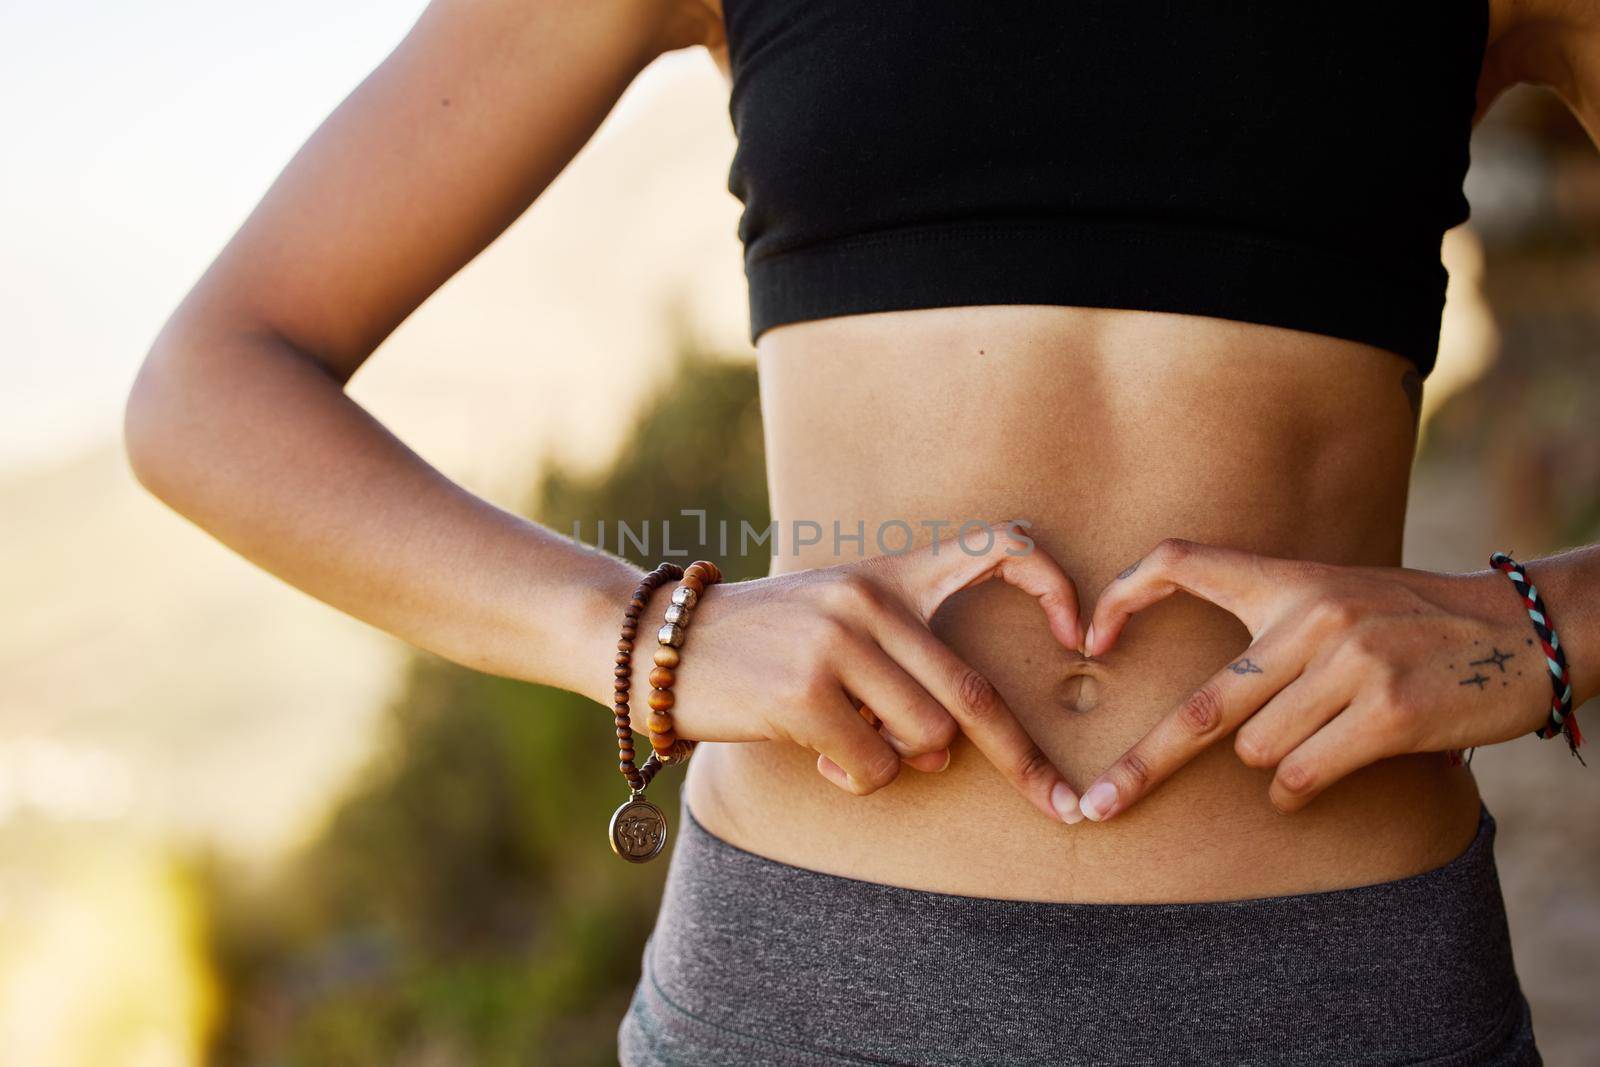 Cropped shot of a young woman forming a heart shape over her stomach.